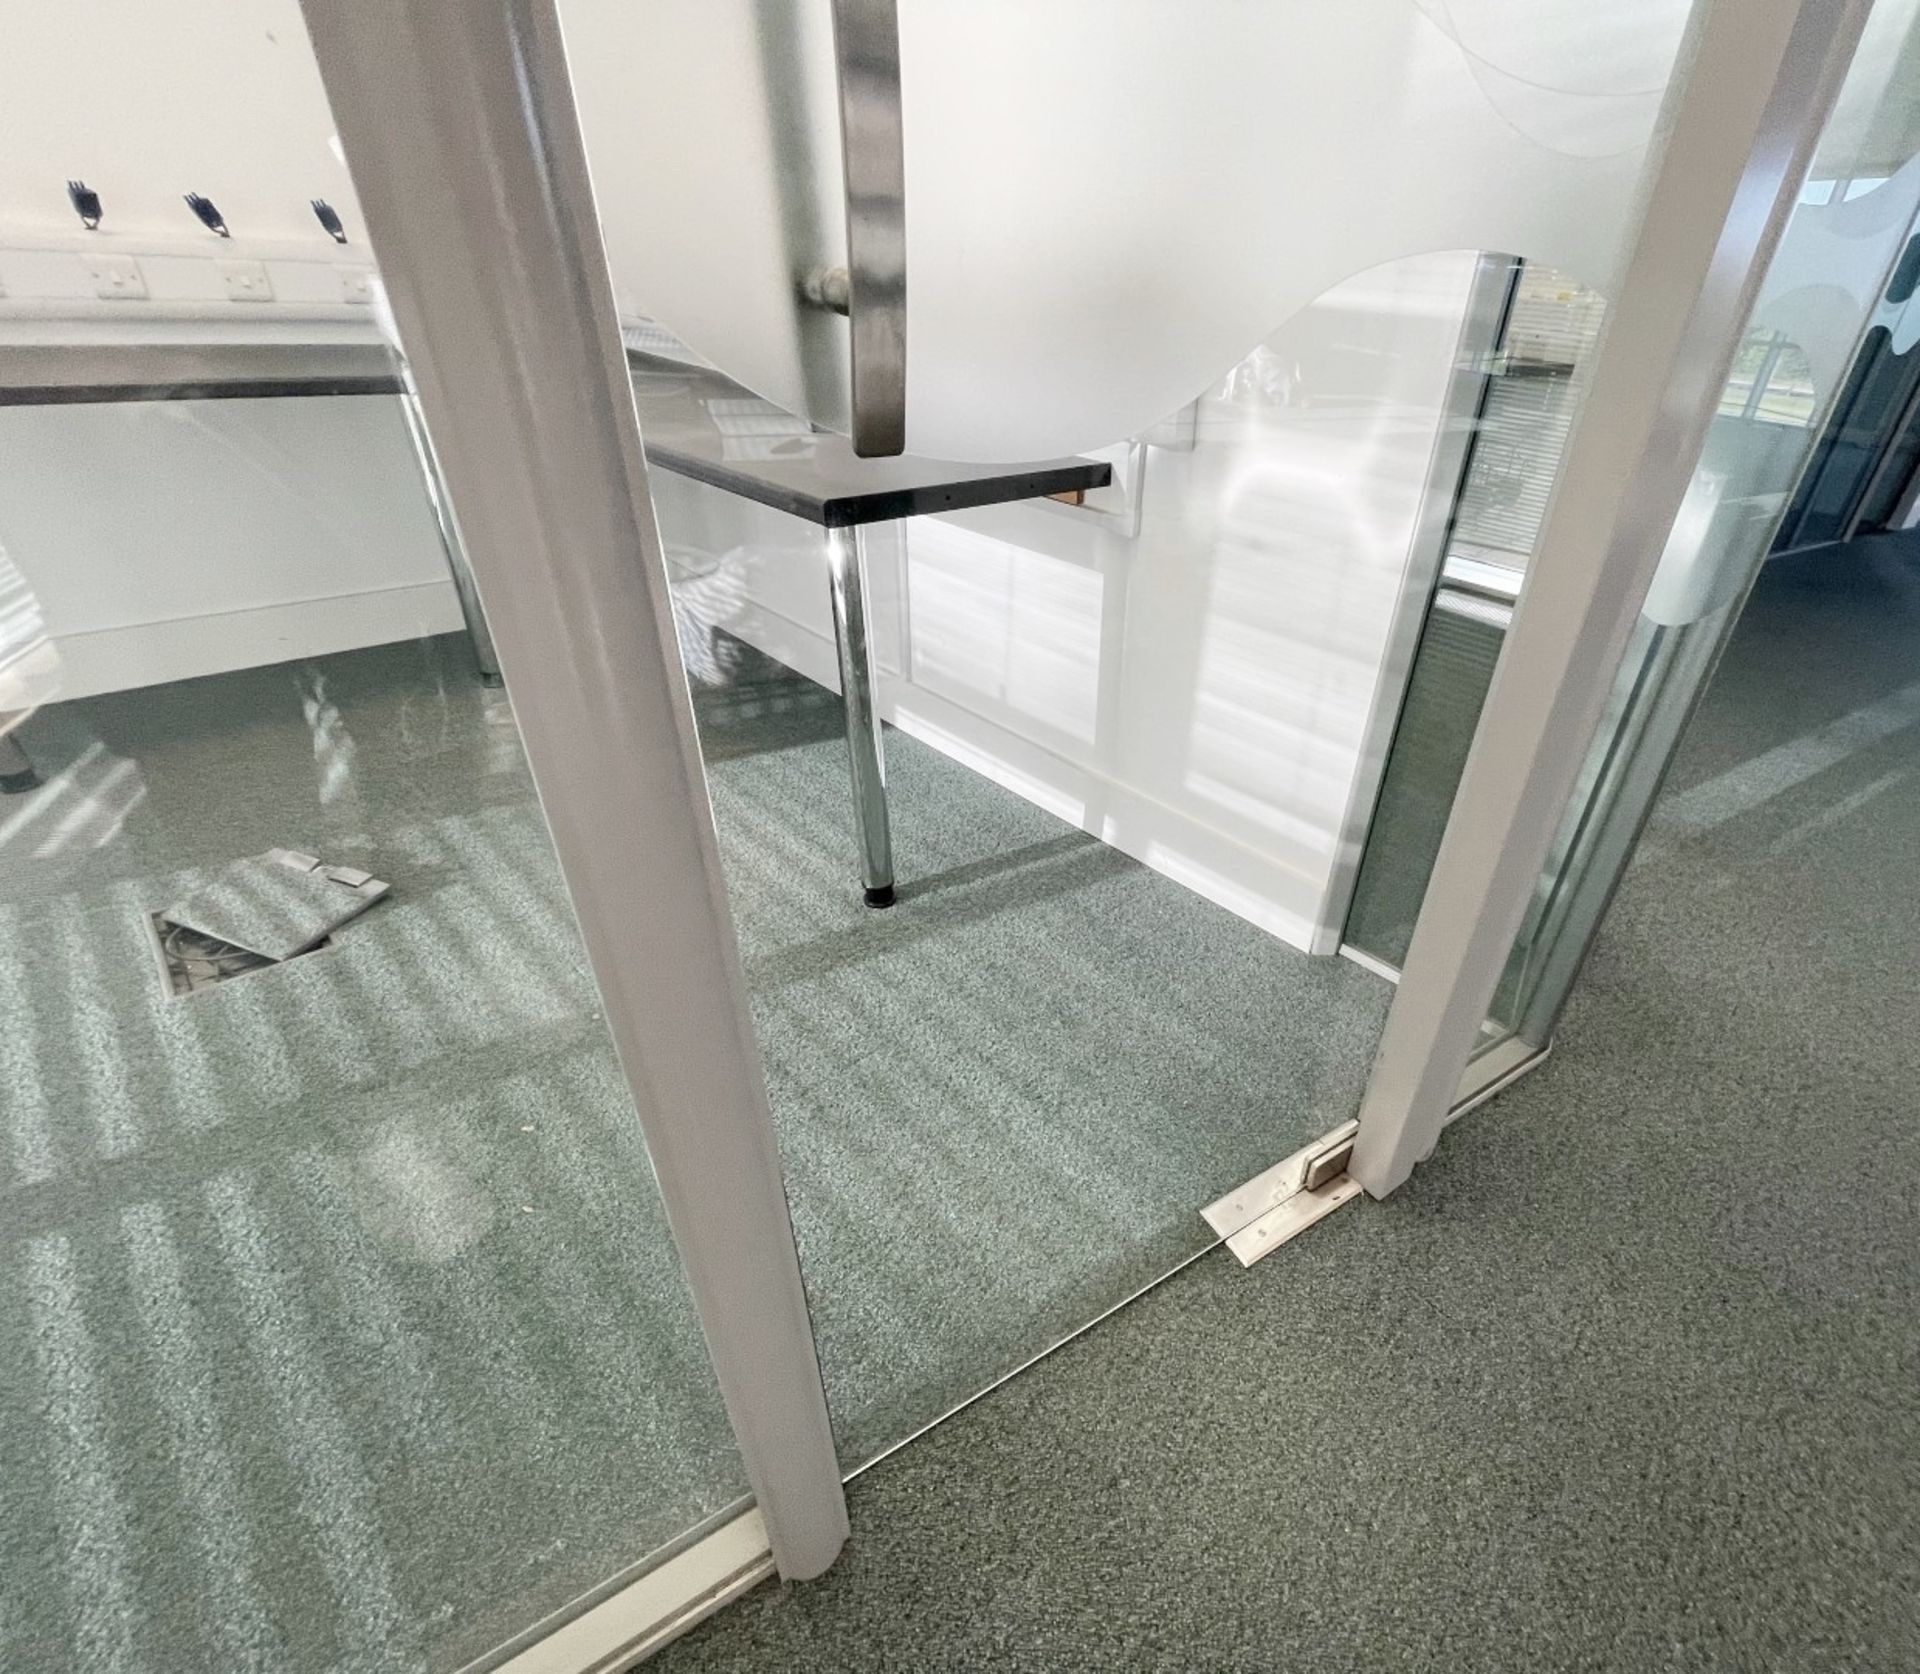 9 x Assorted Glass Office Dividers Panels With 2 x Glass Doors - Currently Covering 2 Offices - Image 10 of 11